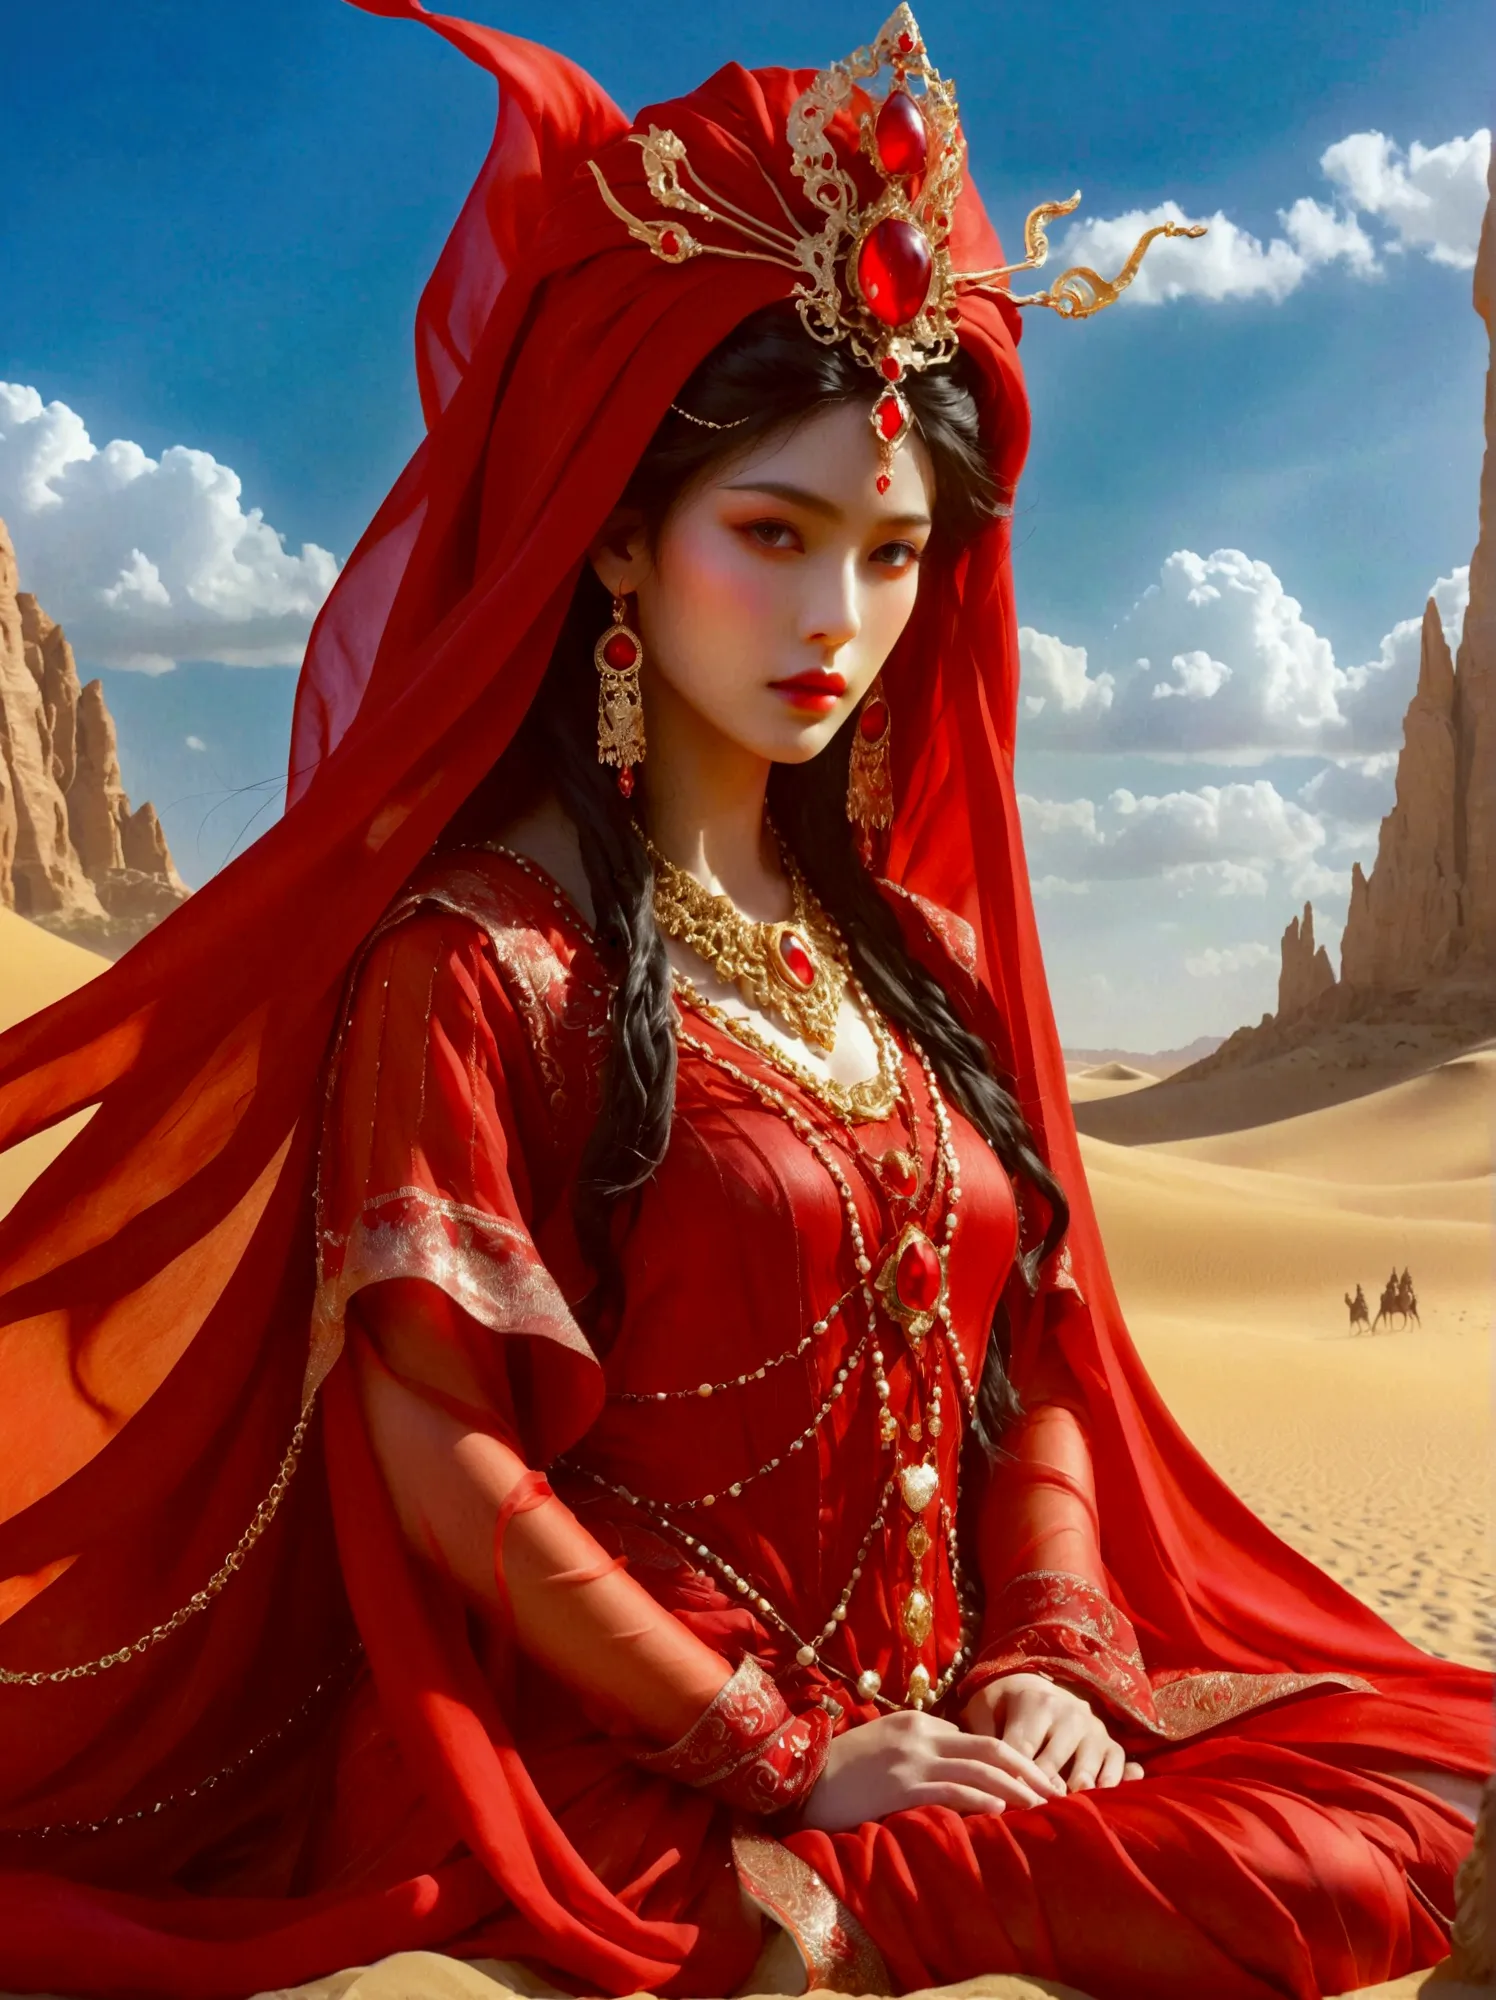 A mysterious desert princess dressed in bright red rules a dystopian desert kingdom，This ruthless figure sat on a huge throne in...